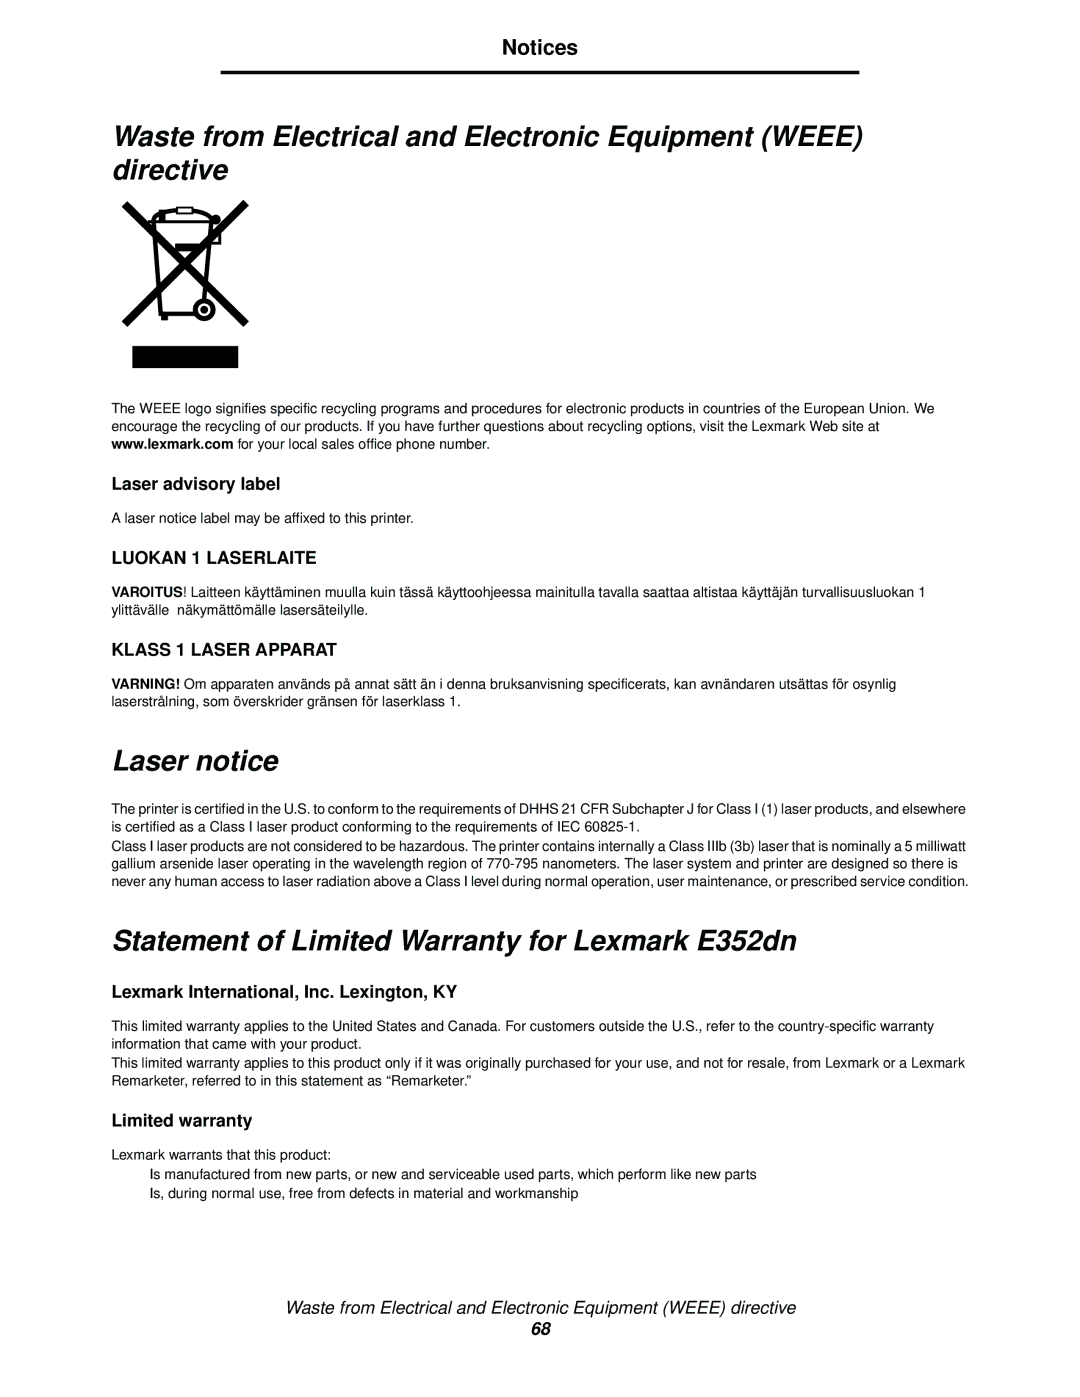 Lexmark E352DN manual Laser notice, Statement of Limited Warranty for Lexmark E352dn 